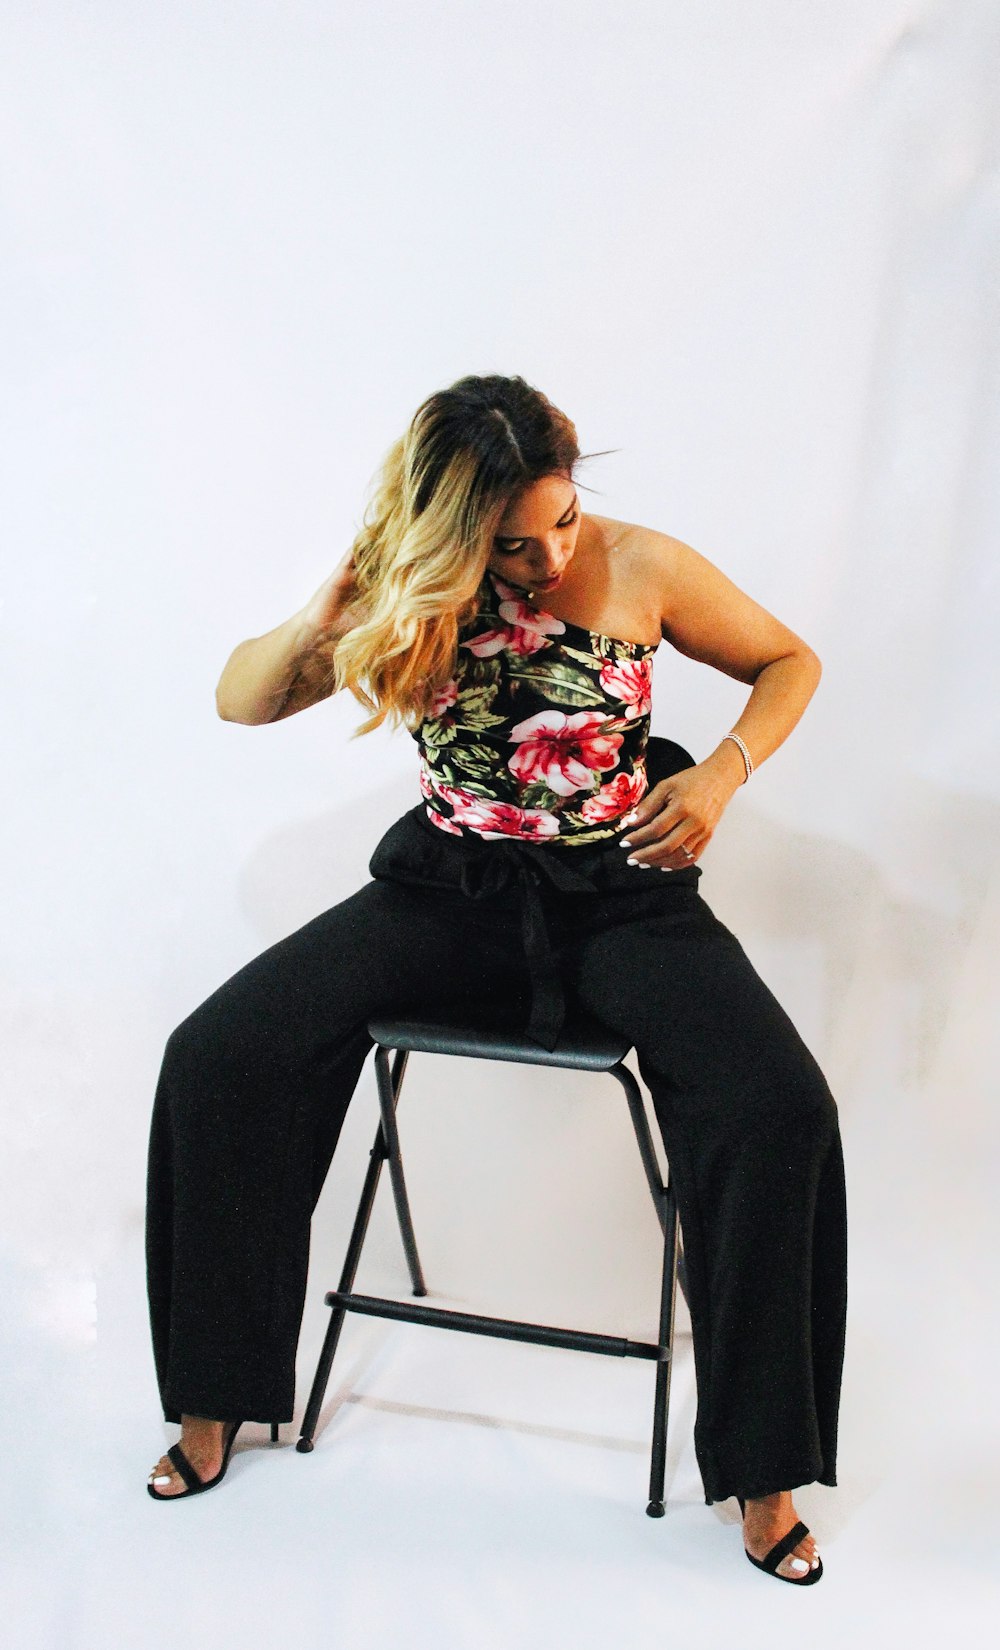 Woman in black and red floral tank top and black pants sitting on